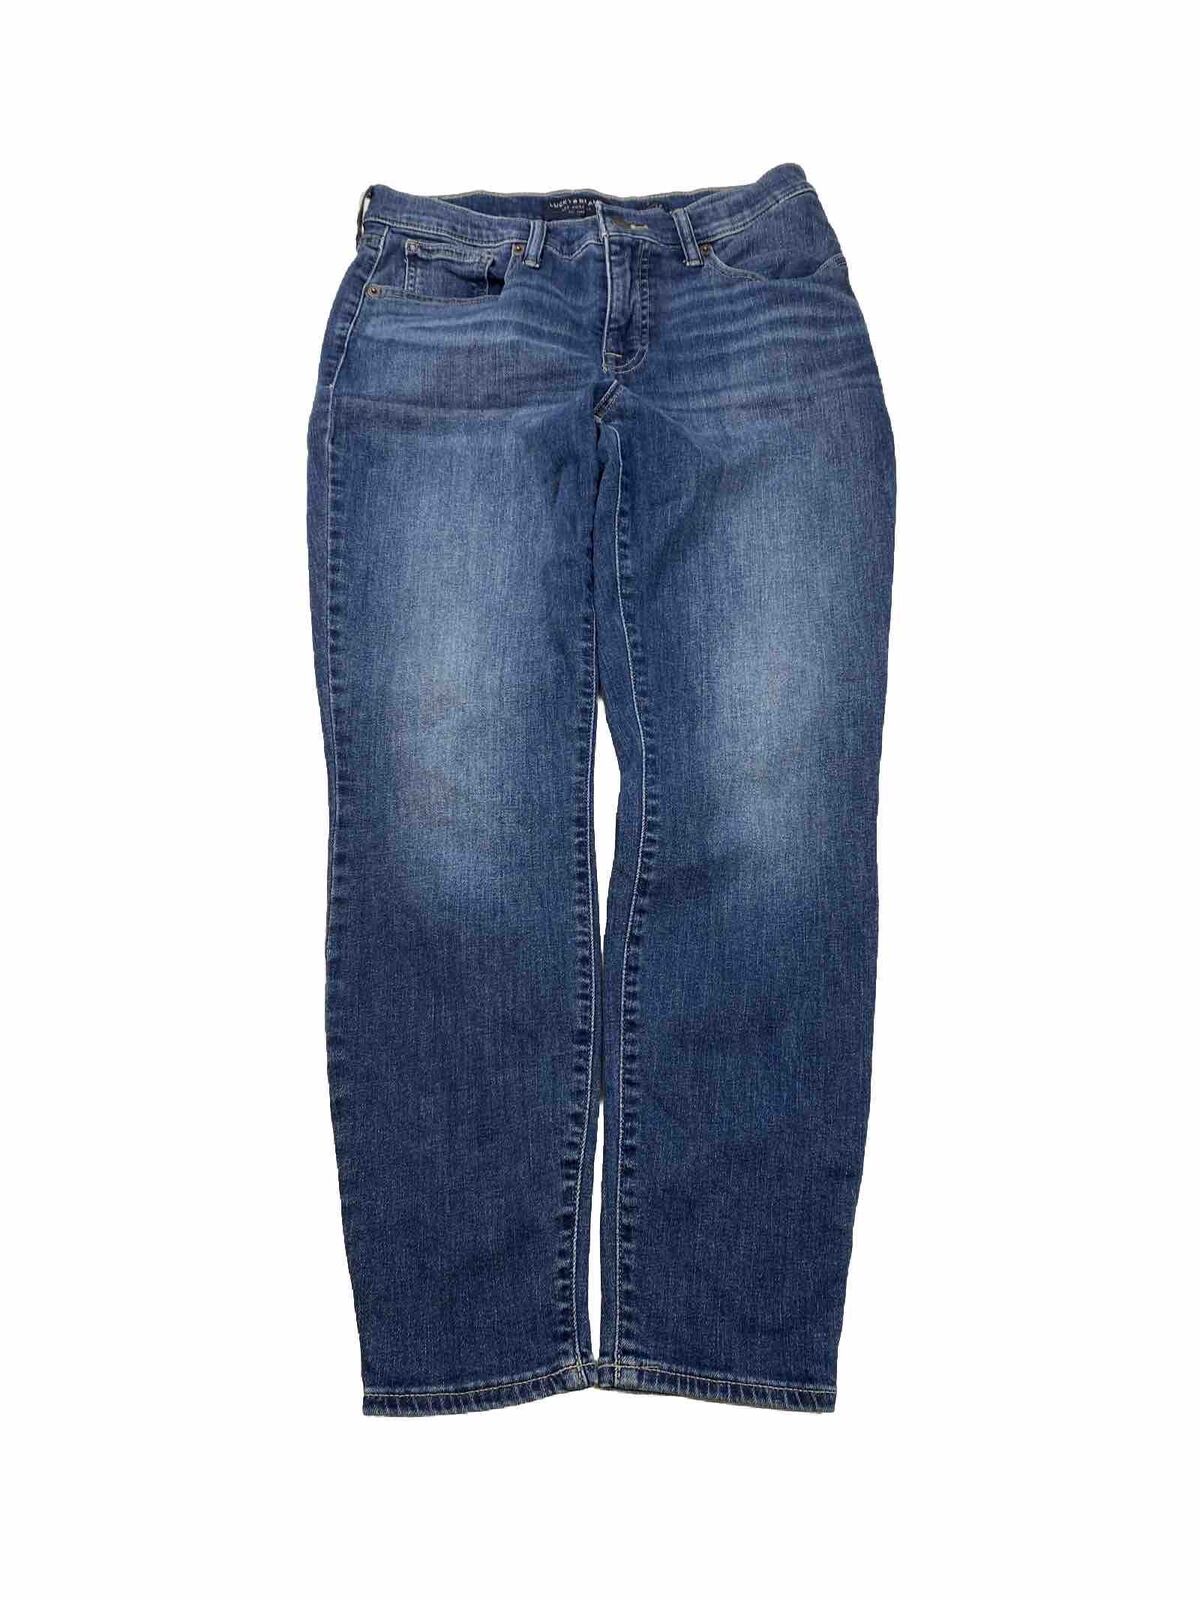 Lucky Brand Women's Medium Wash Stretch Ankle Jeans - 6/28